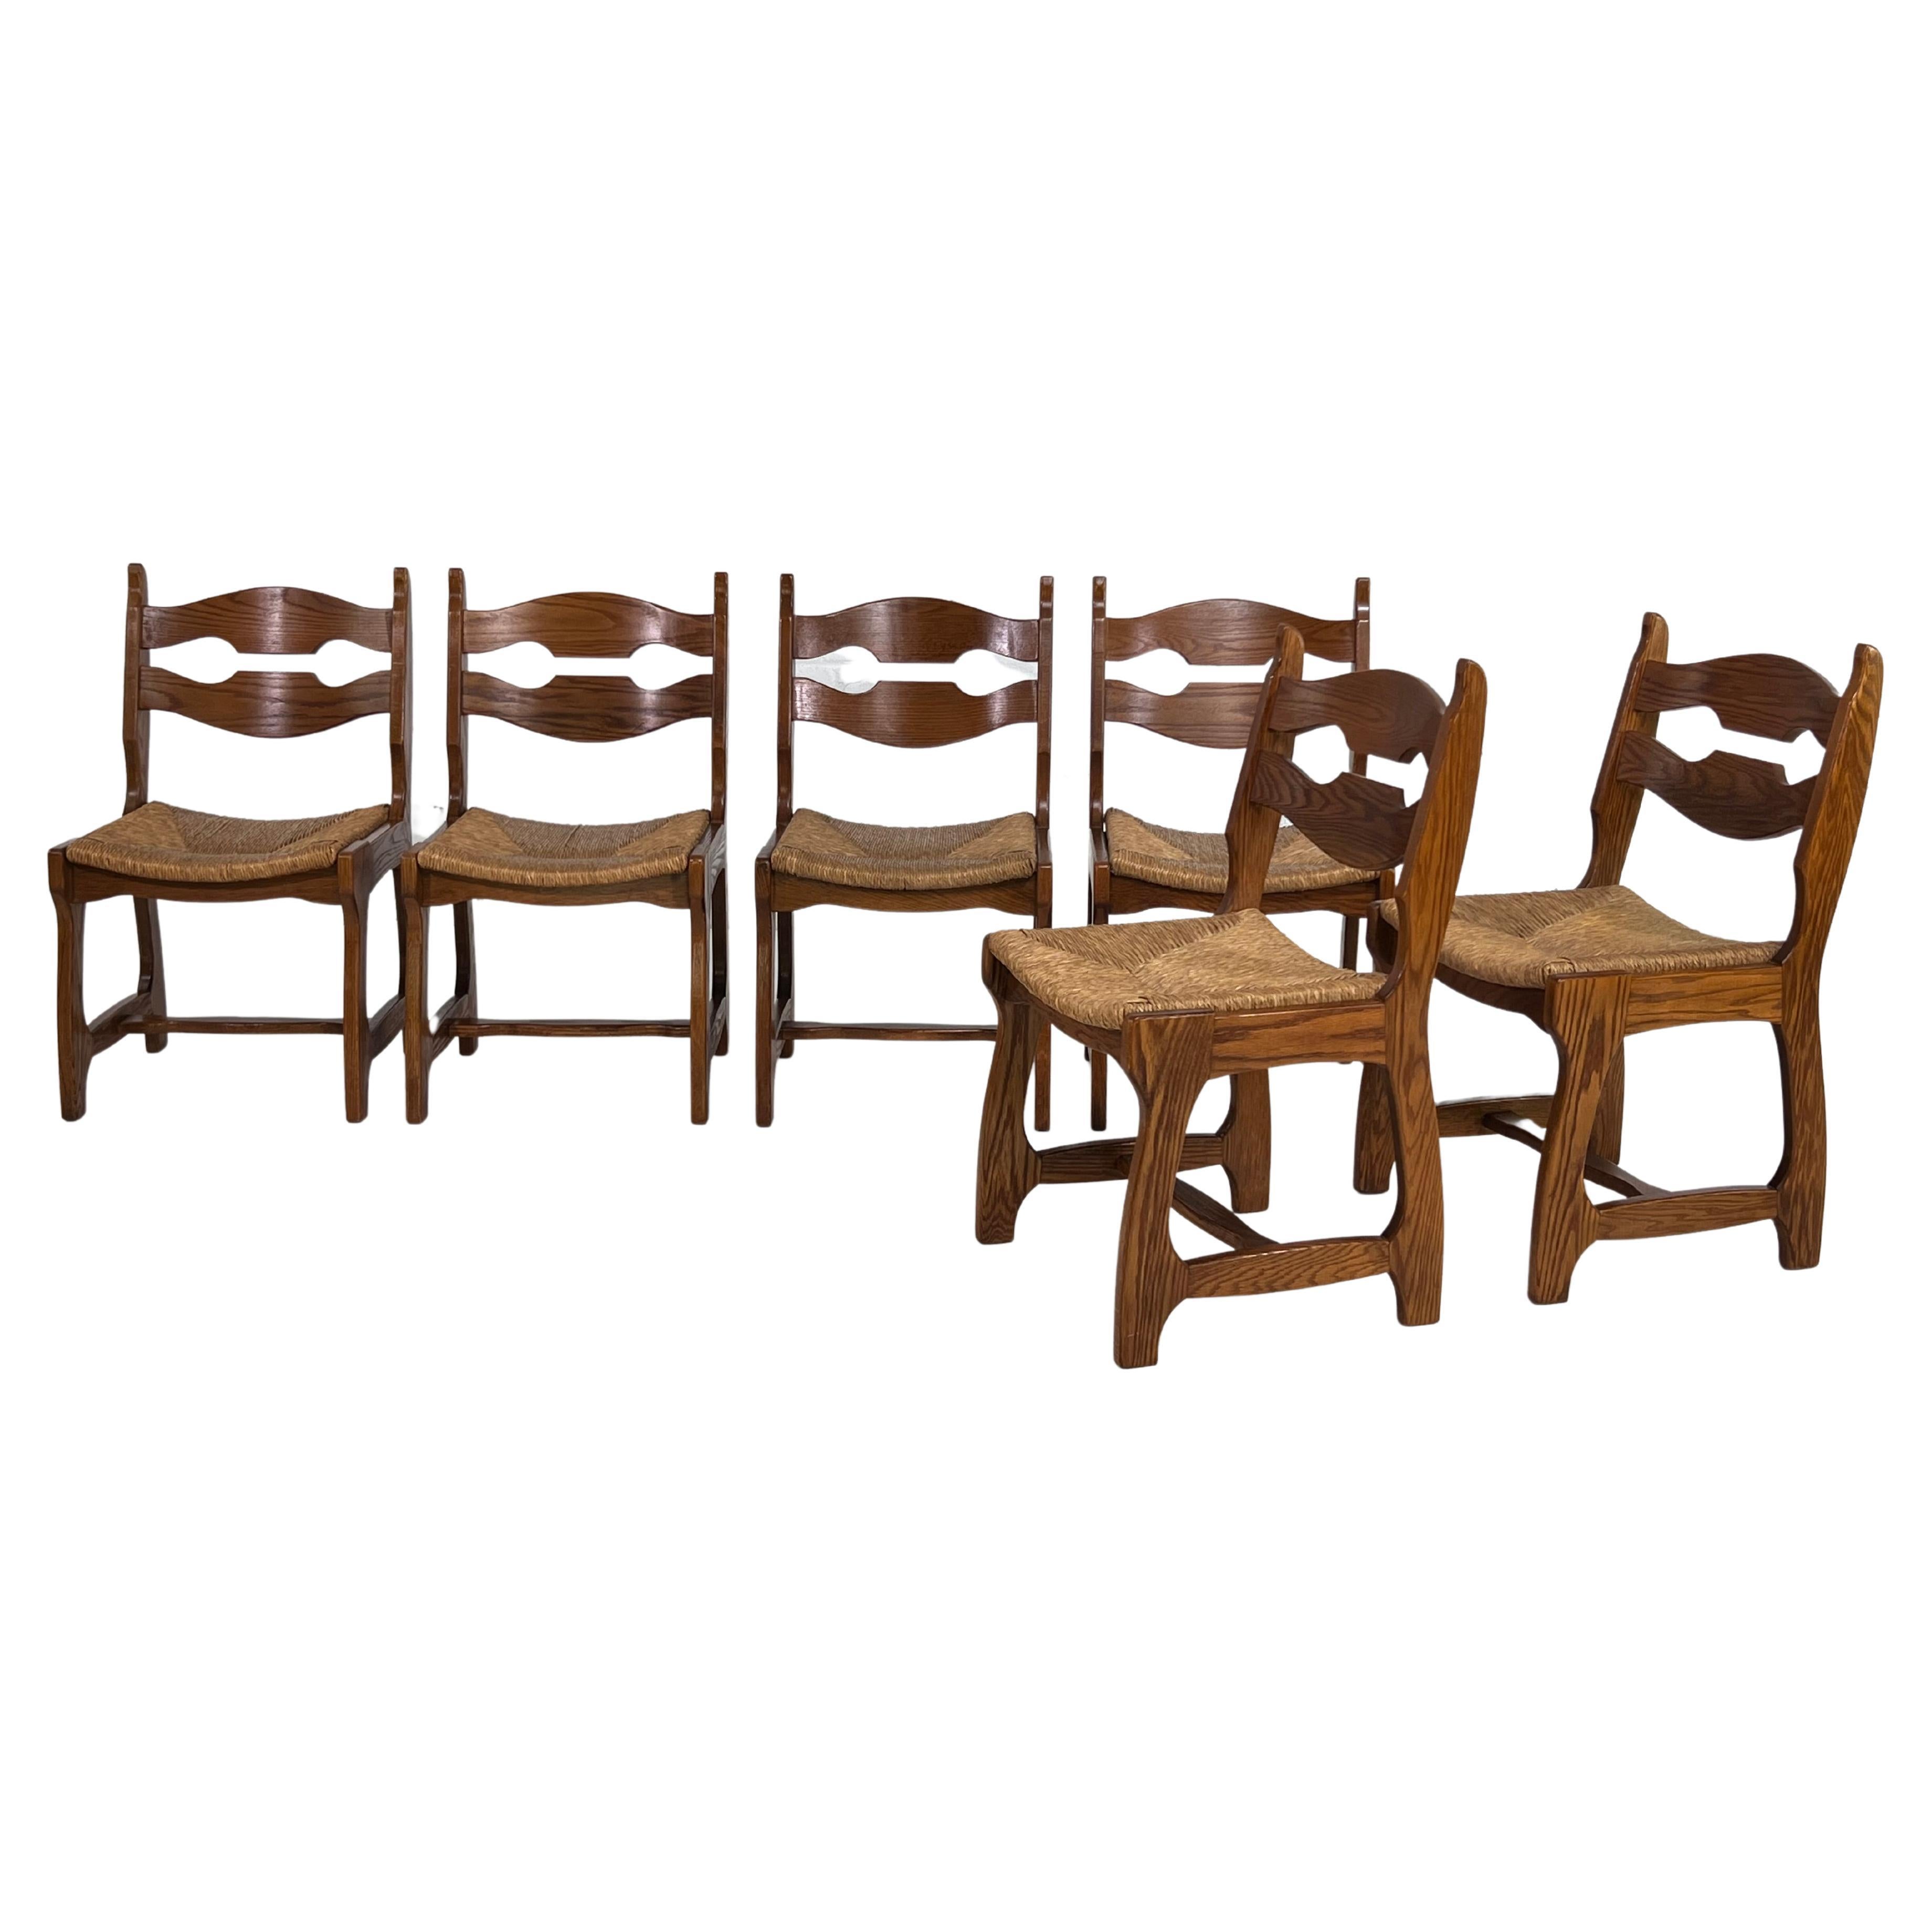 1950s Design Oak Wooden and Braided Straw Seats Set of 6 Chairs For Sale